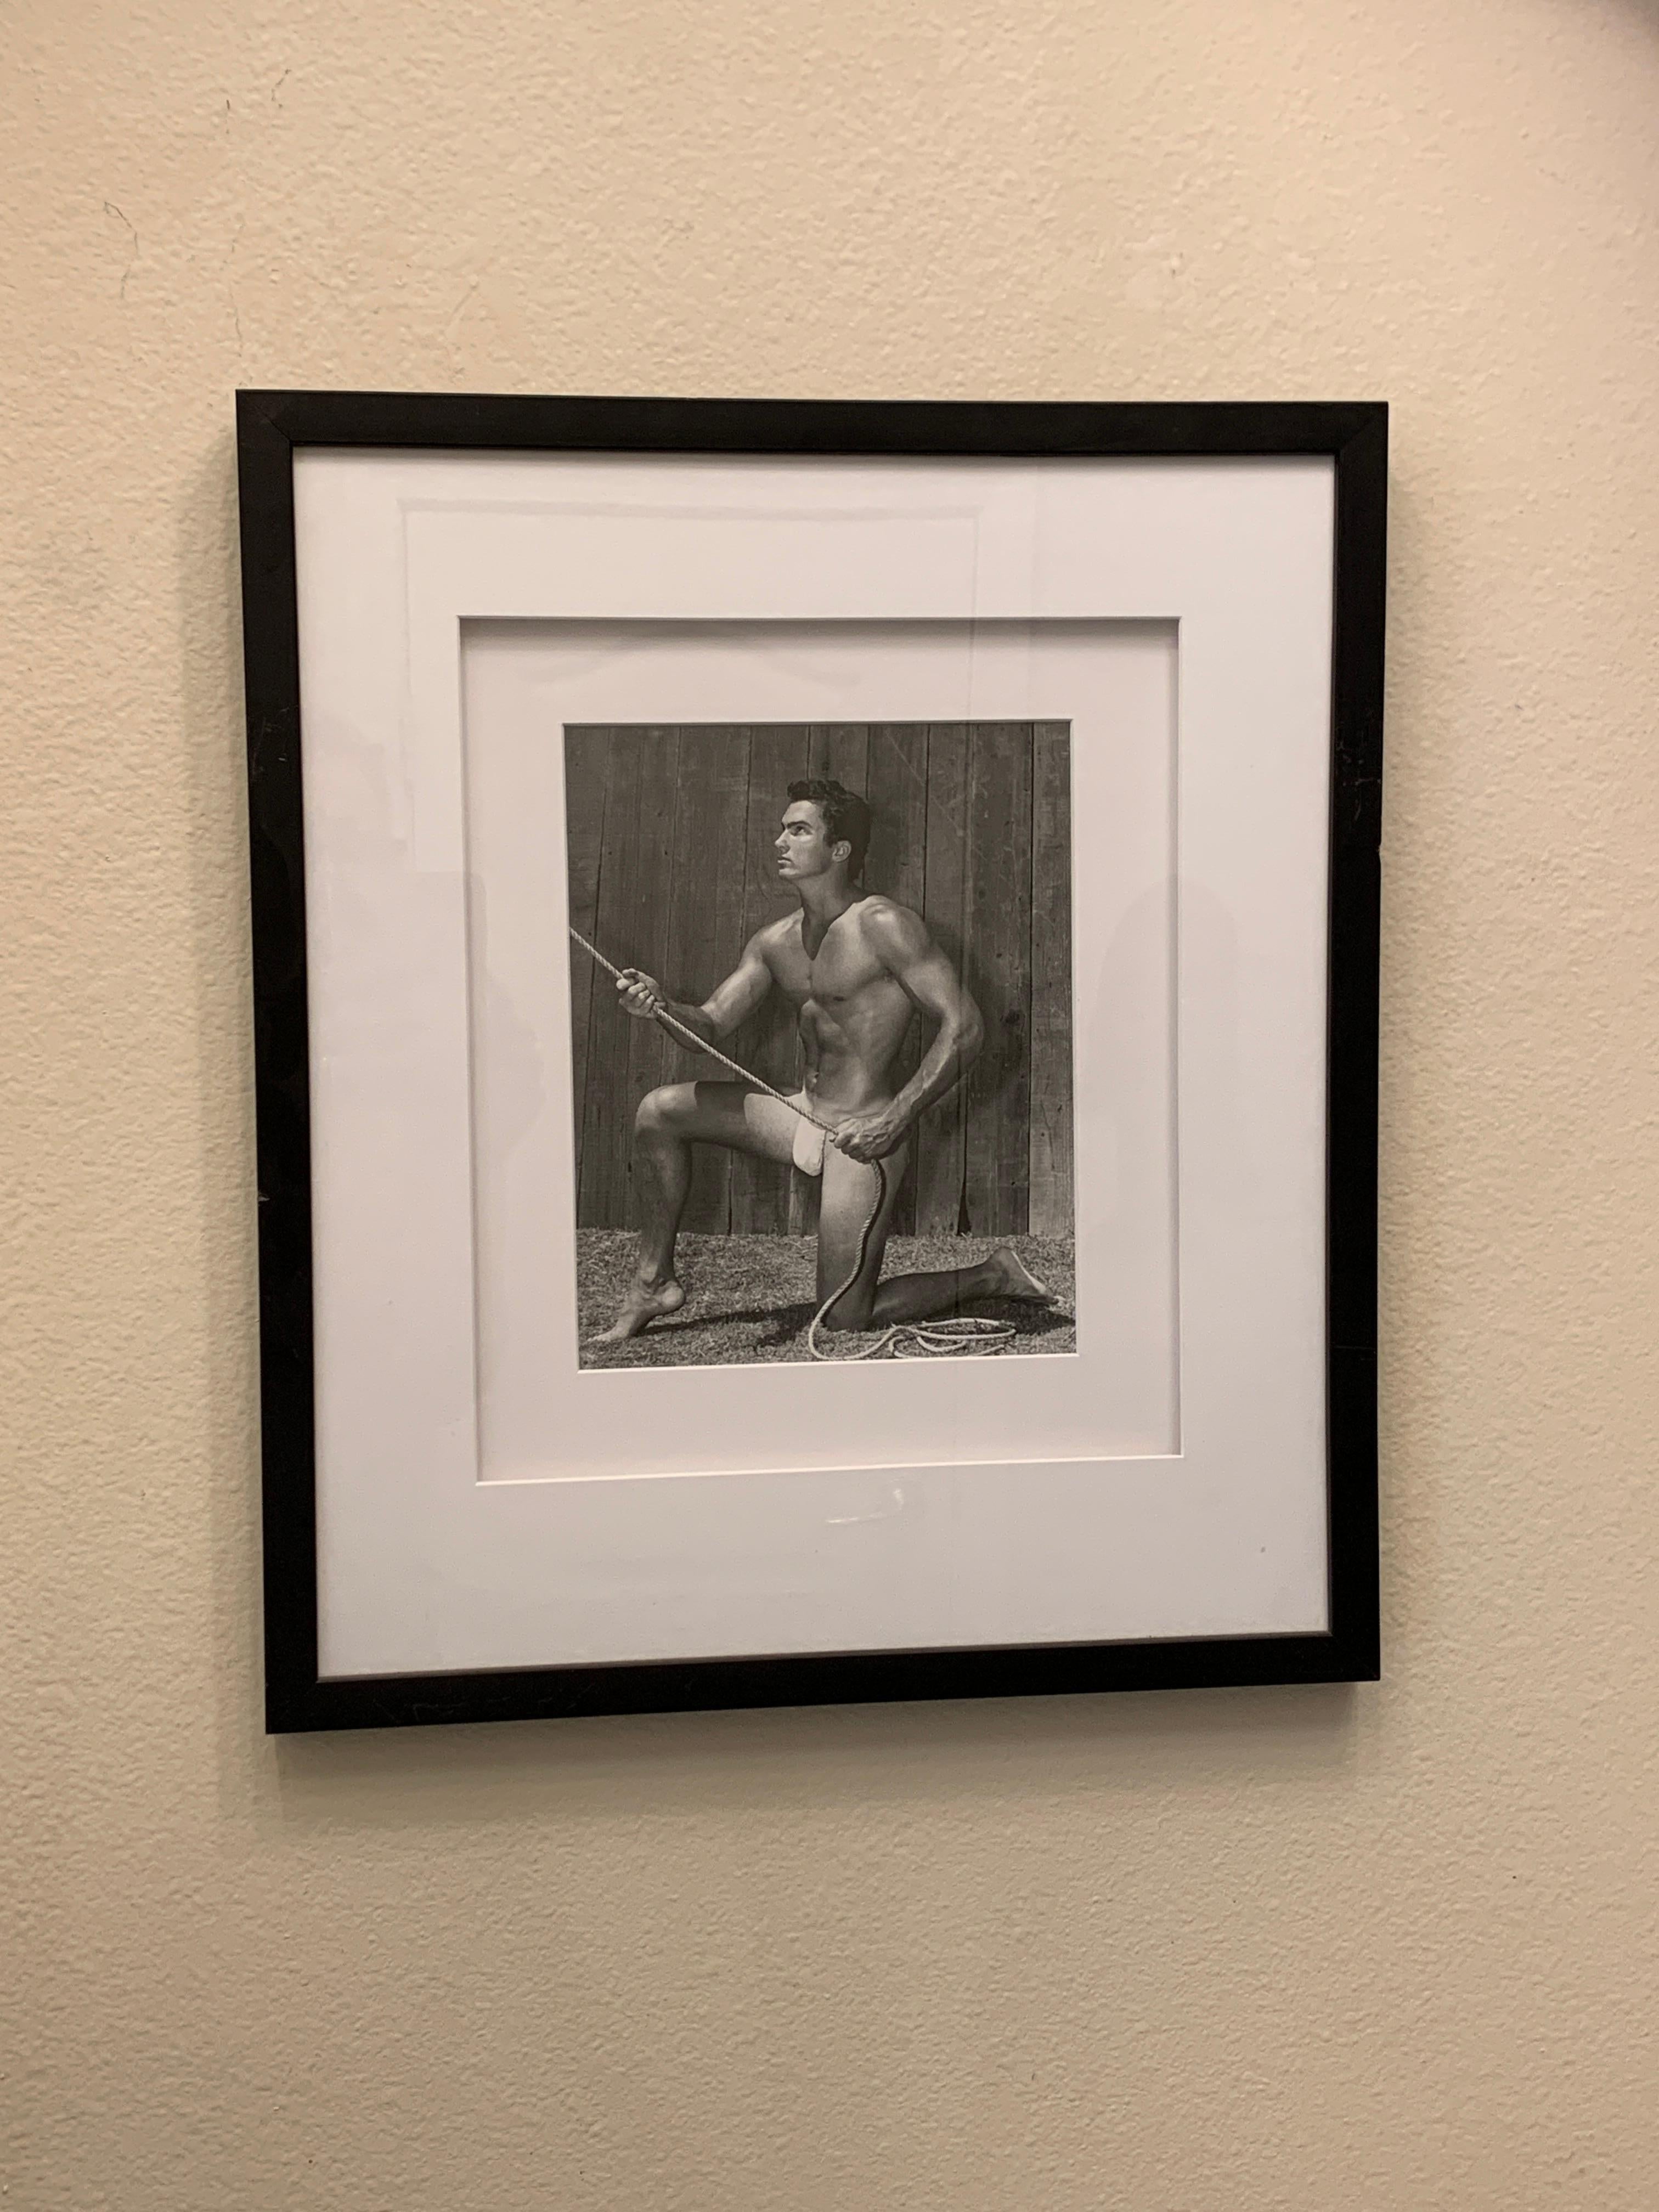 Hand-Crafted Bruce of L.A.Original 1950s Male Physique Photograph Model Handsome Bill Gregory For Sale